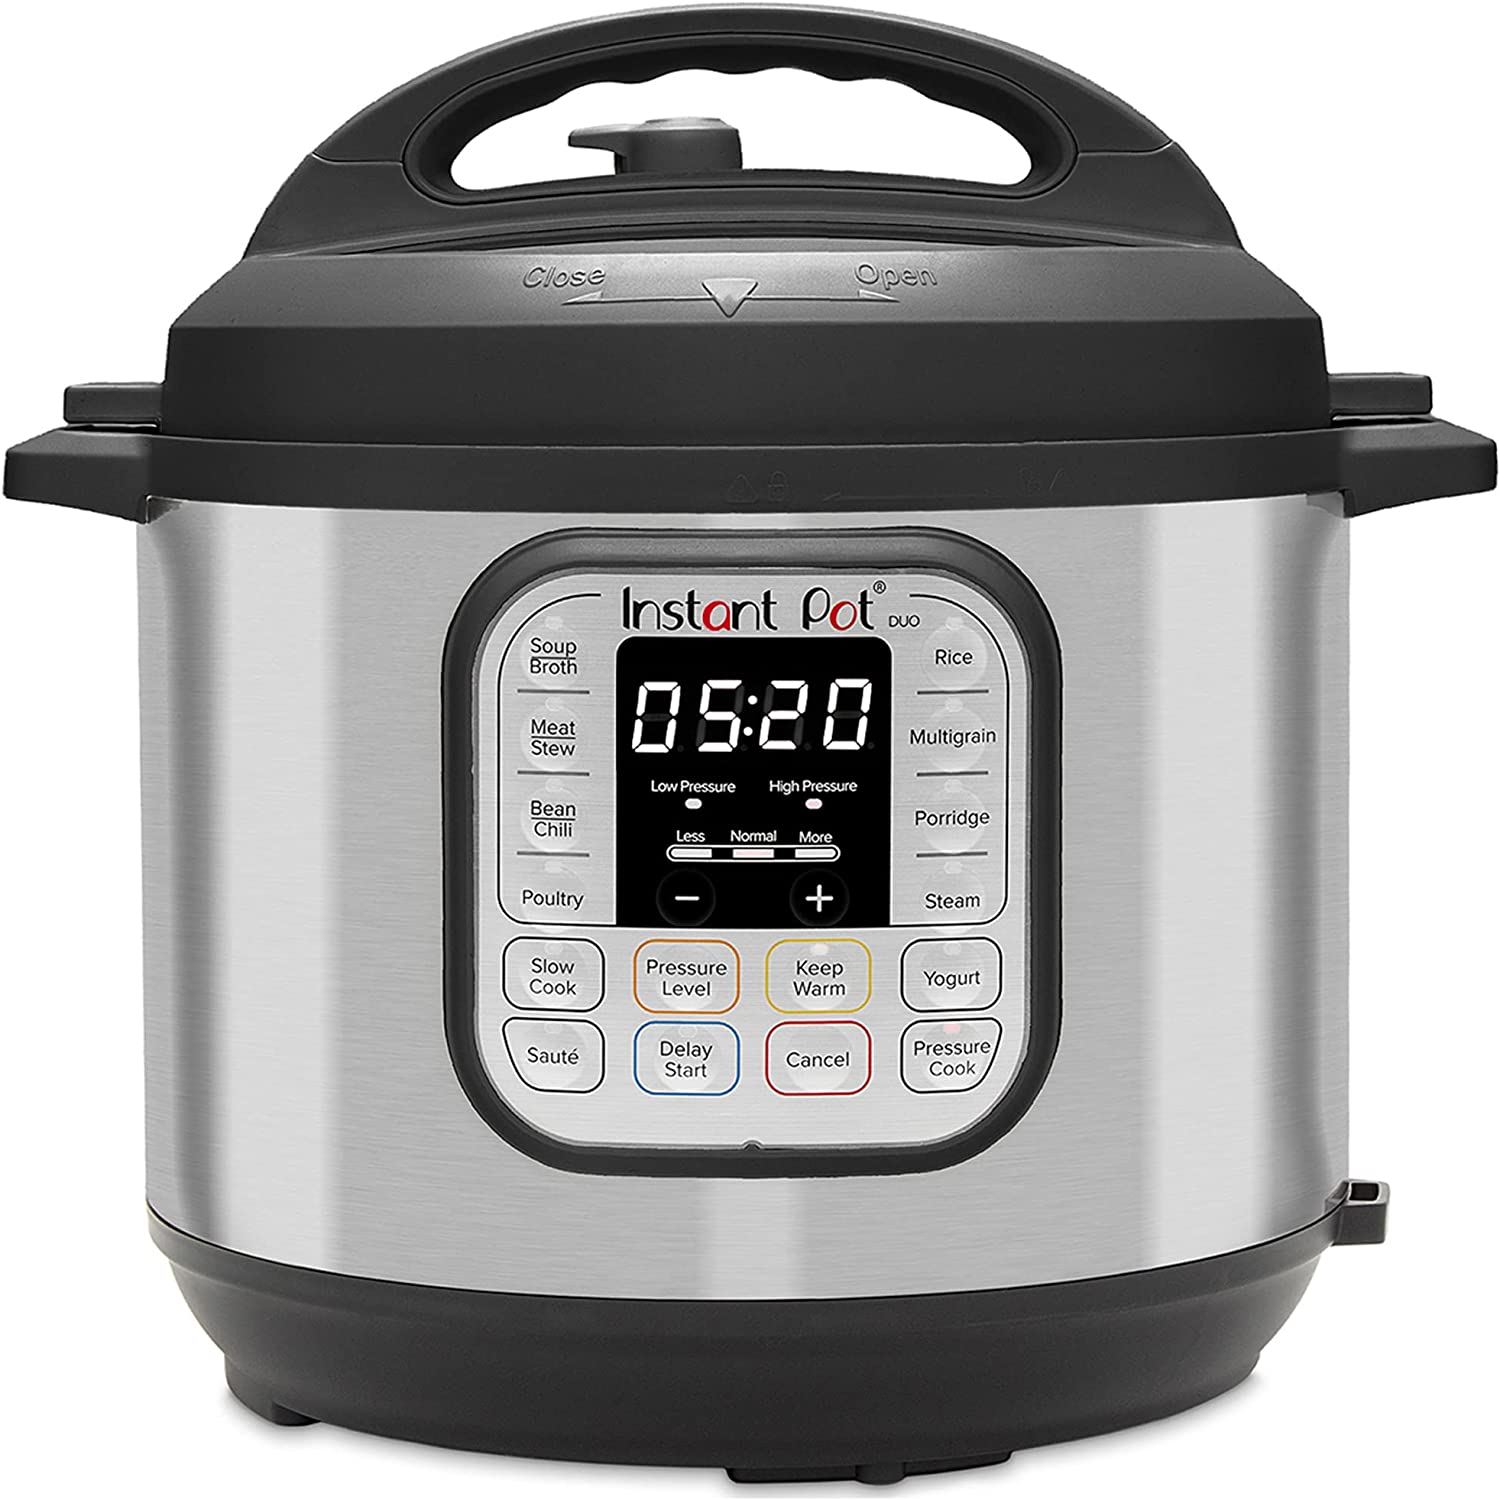 Instant pot for home cooks gift idea list. 